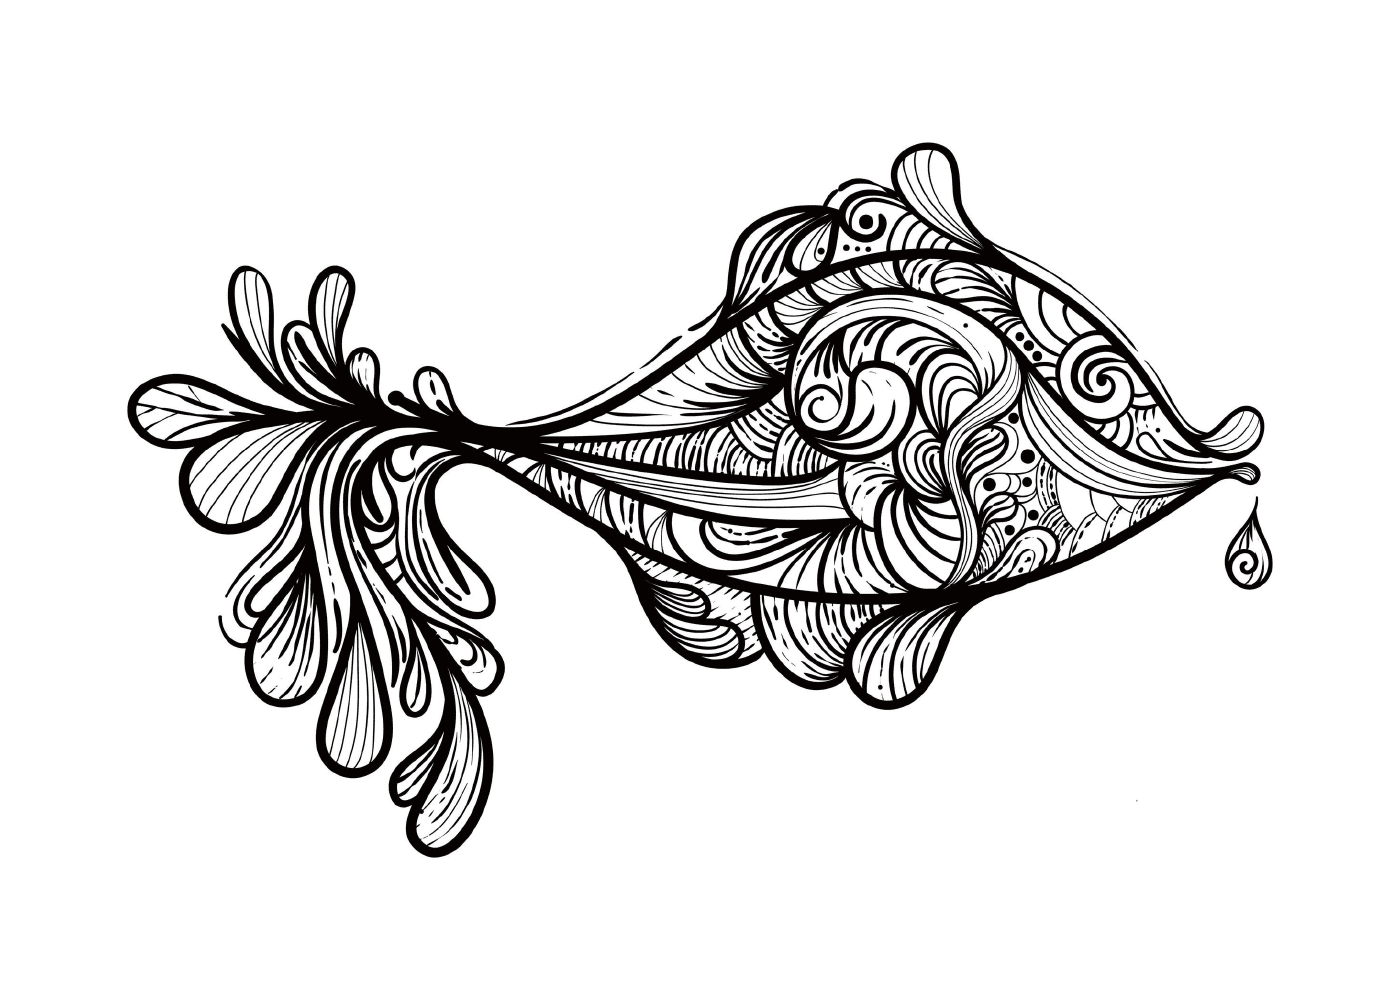  Fish with coloring patterns 